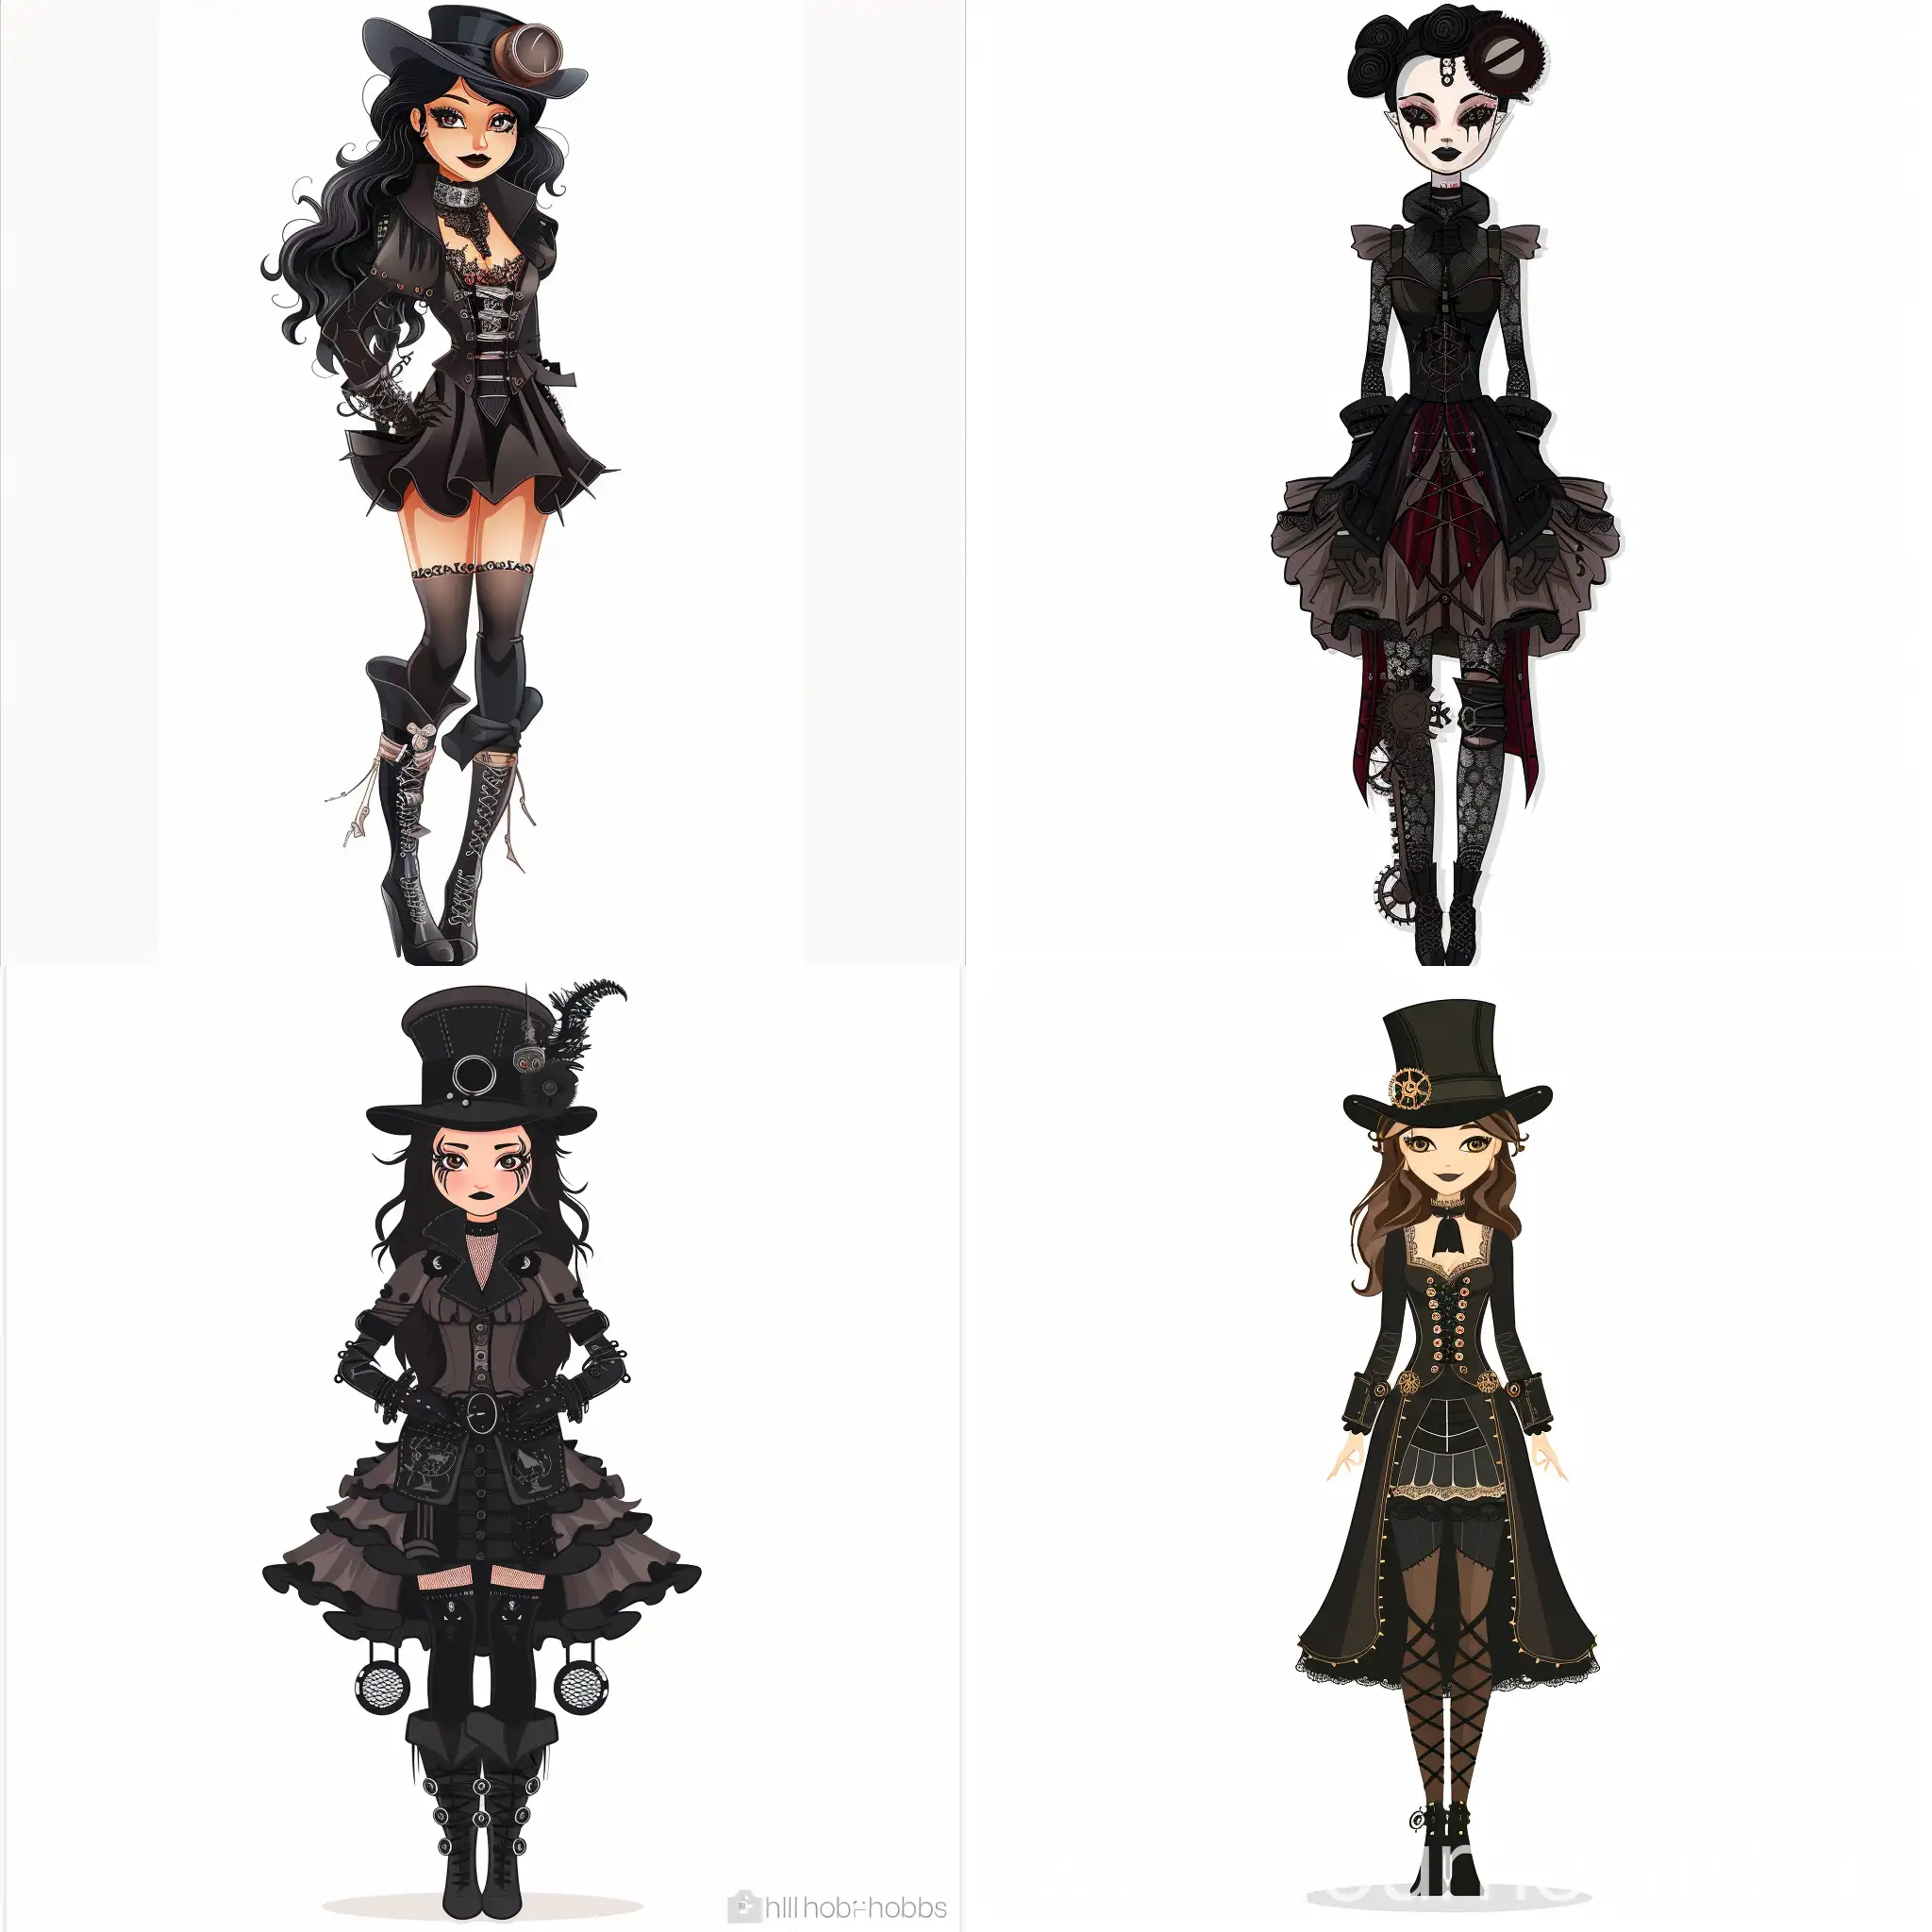 goth steampunk girl entire body illustration clipart by holly hobbie, full body, super high quality, professional clipart, isolated white background, in flat style